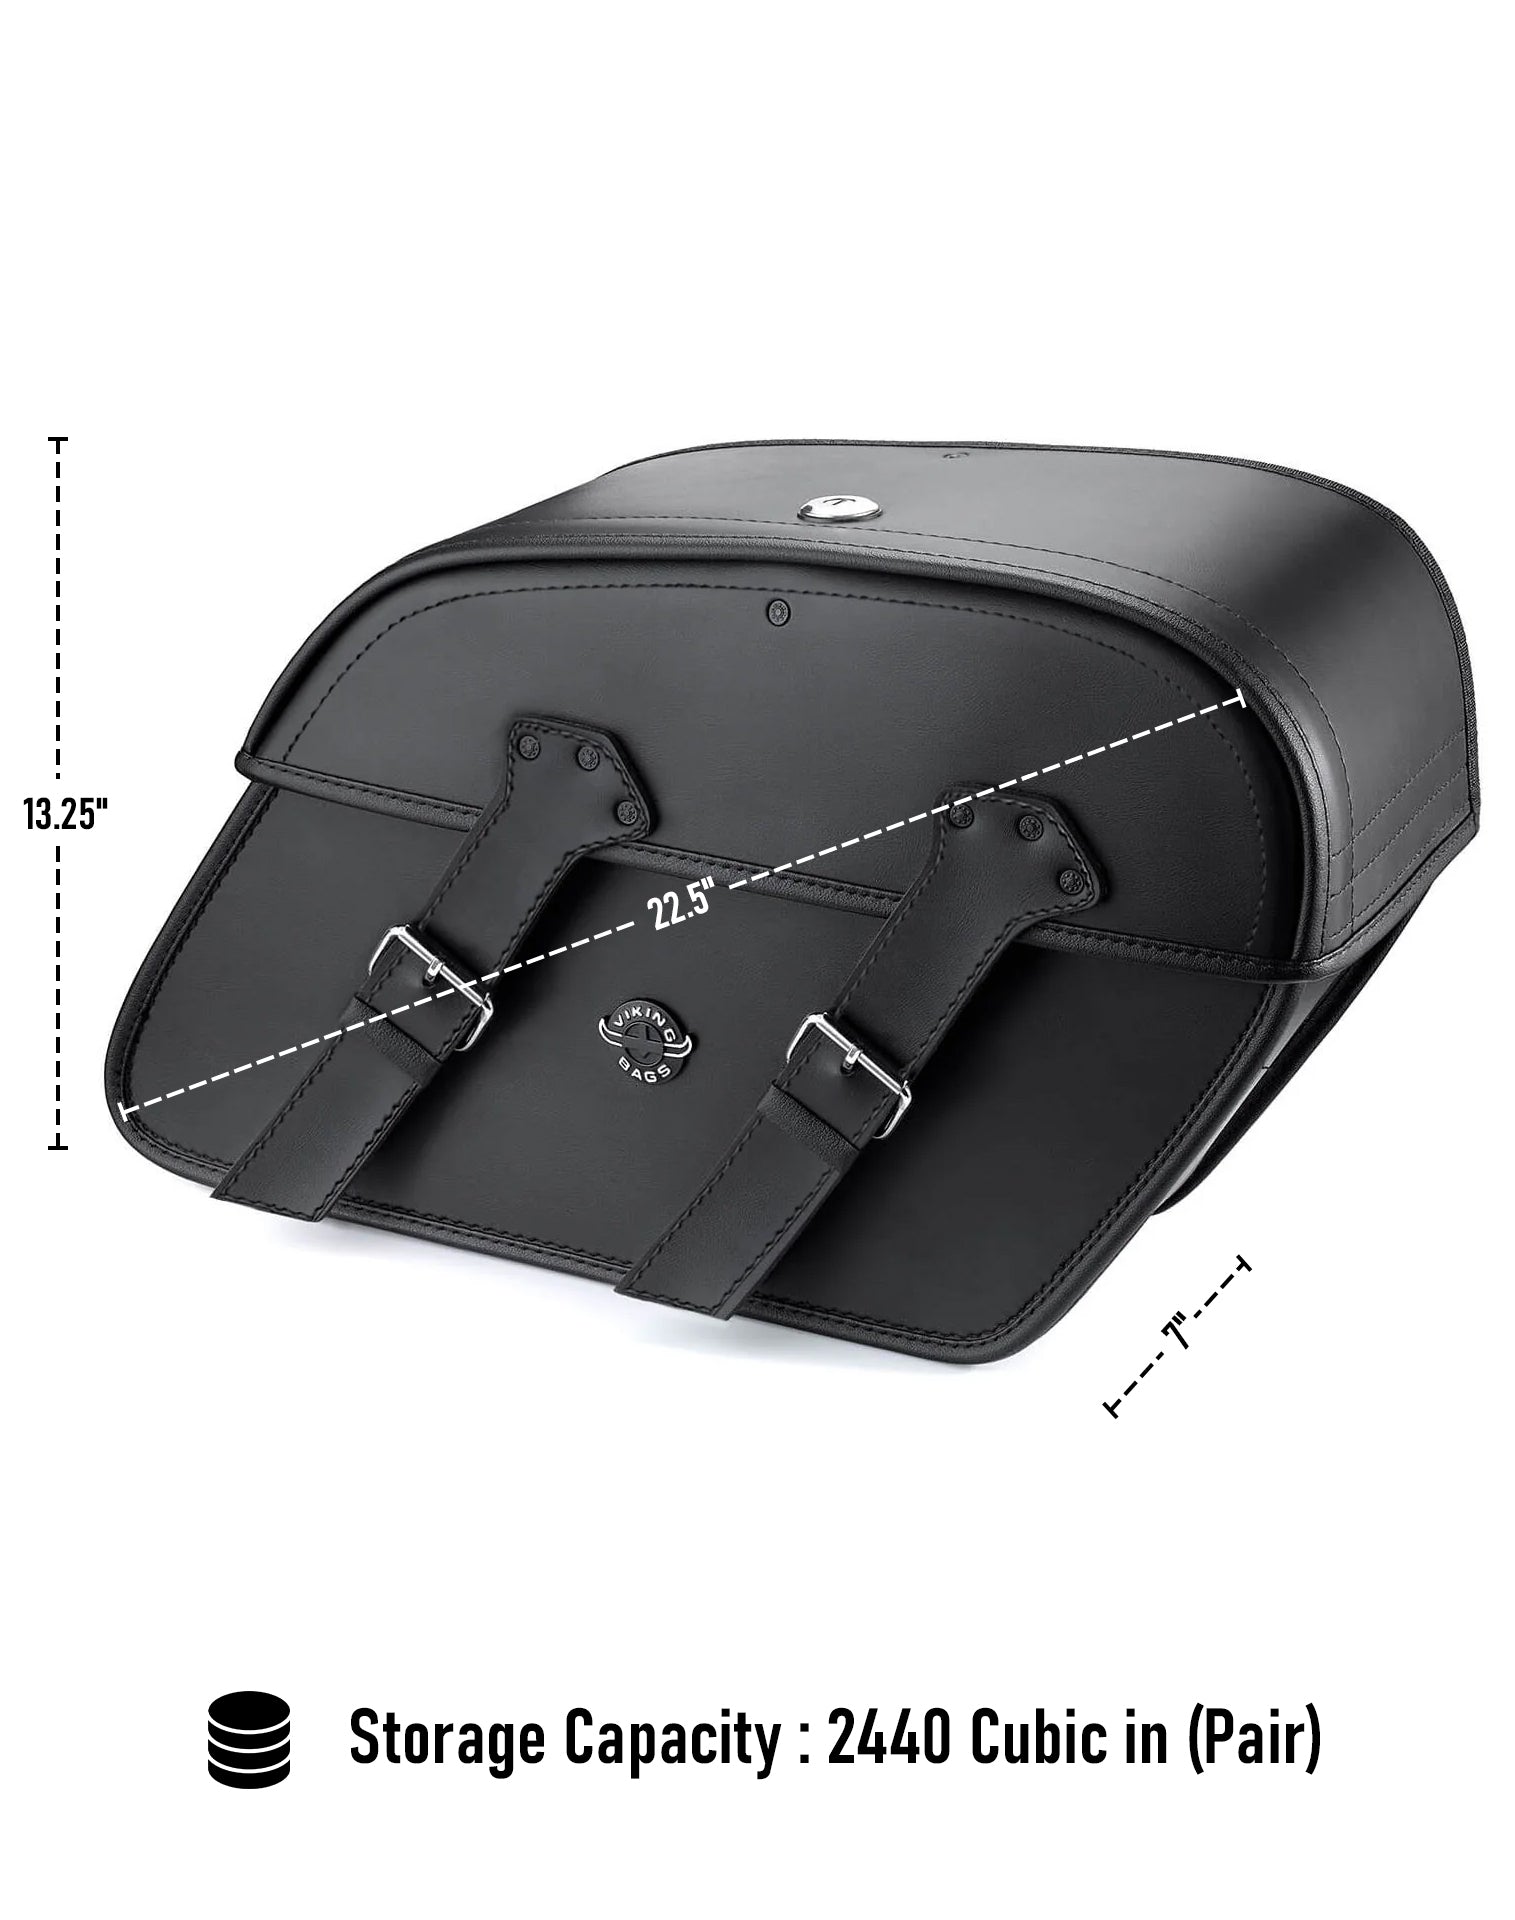 Viking Raven Extra Large Triumph Thunderbird Se Leather Motorcycle Saddlebags Can Store Your Ridings Gears